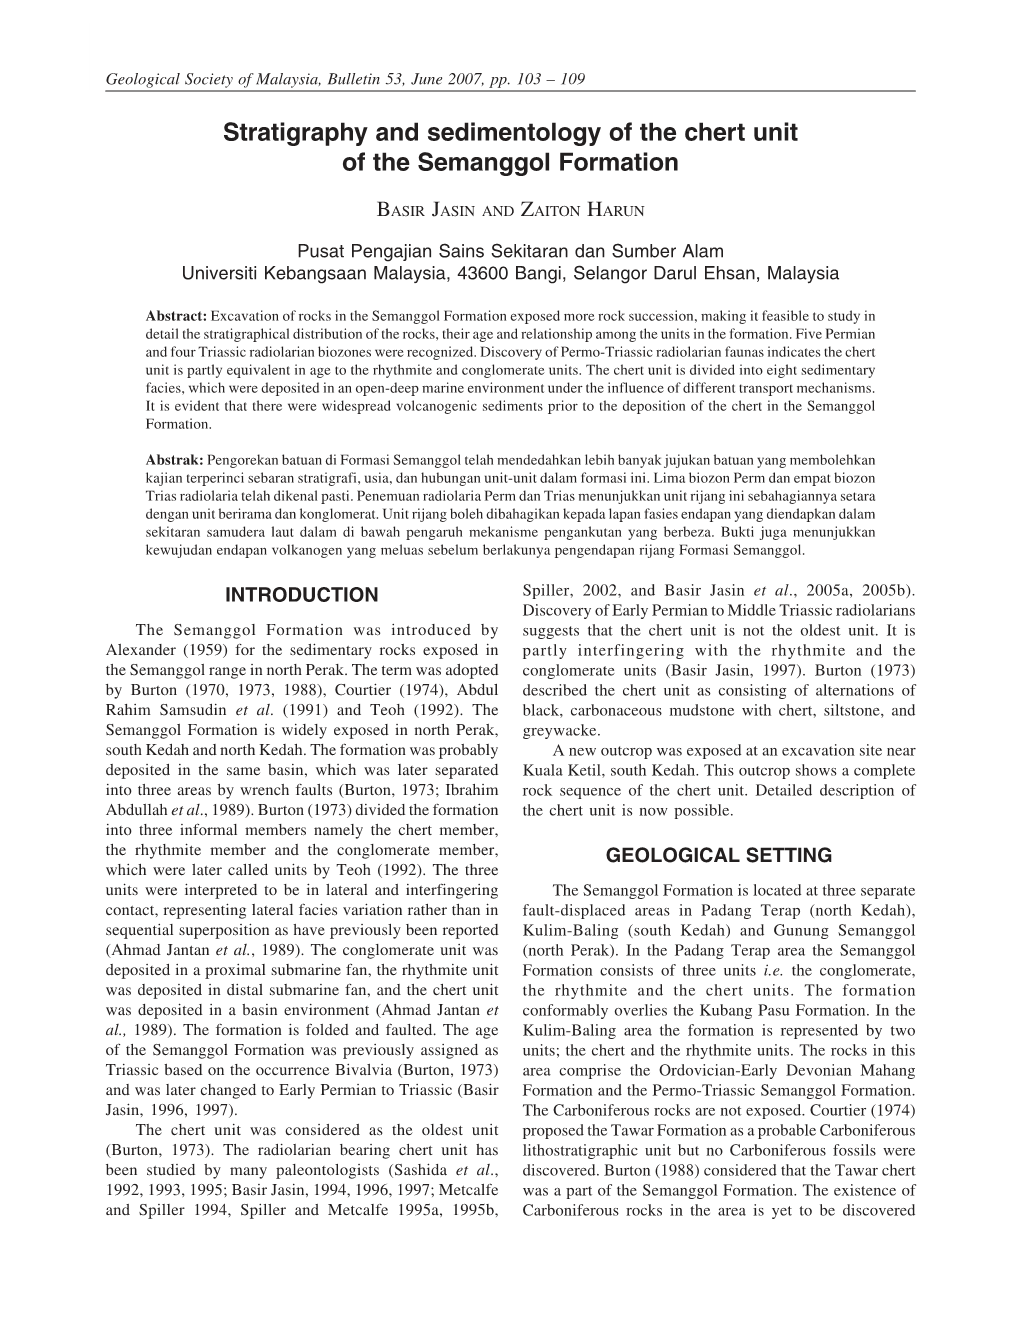 STRATIGRAPHY and SEDIMENTOLOGY of the CHERT UNIT of the SEMANGGOL FORMATION Geological Society of Malaysia, Bulletin 53, June 2007, Pp